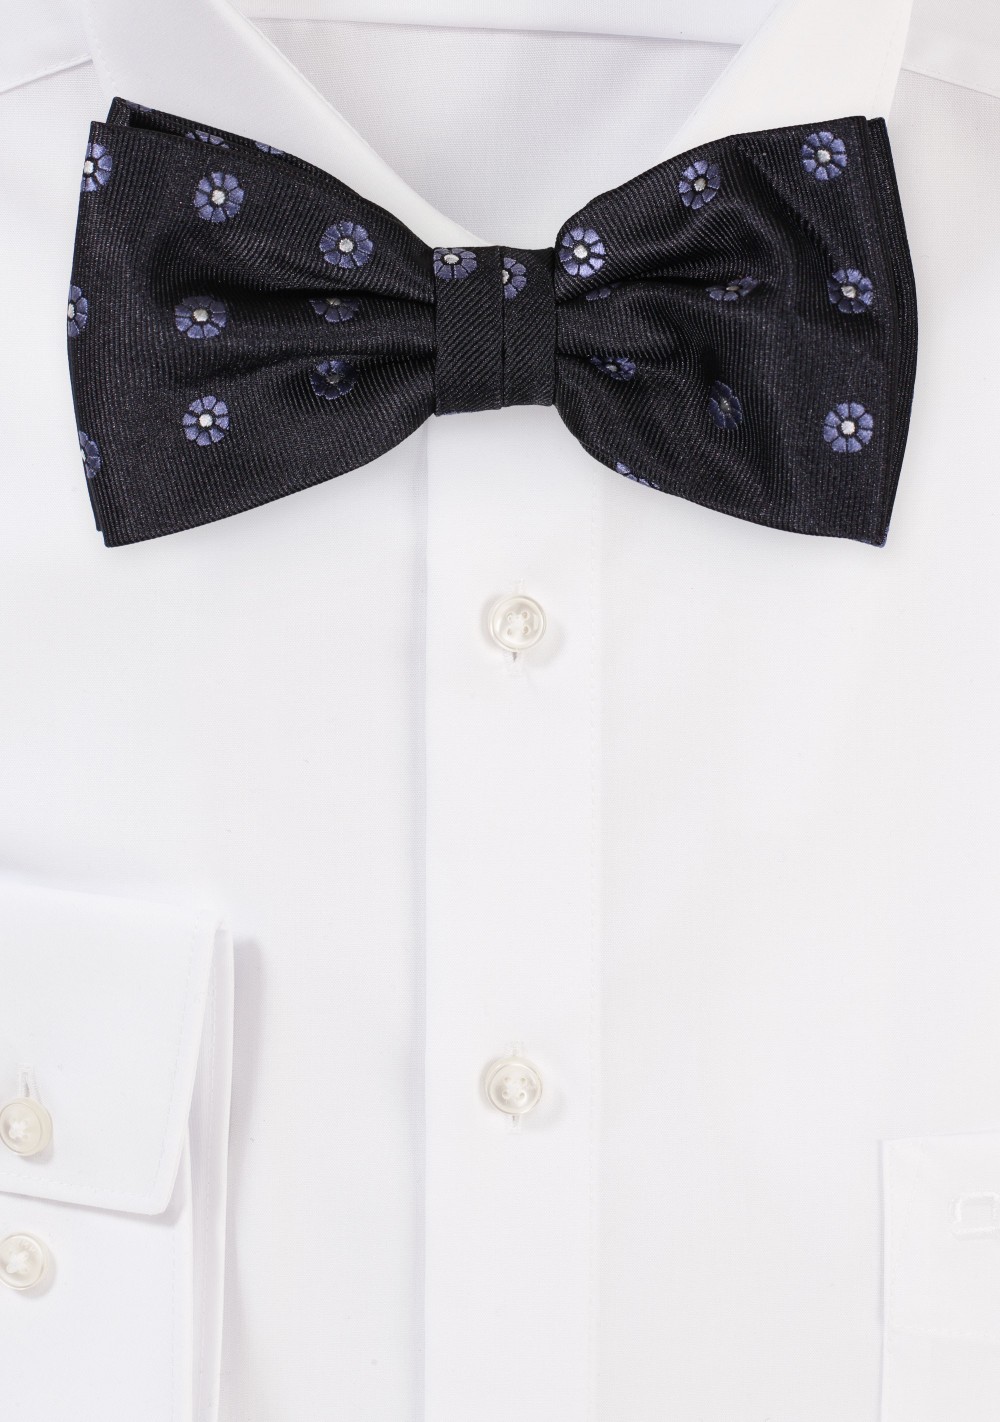 Black Bow Tie with Silver Woven Flowers